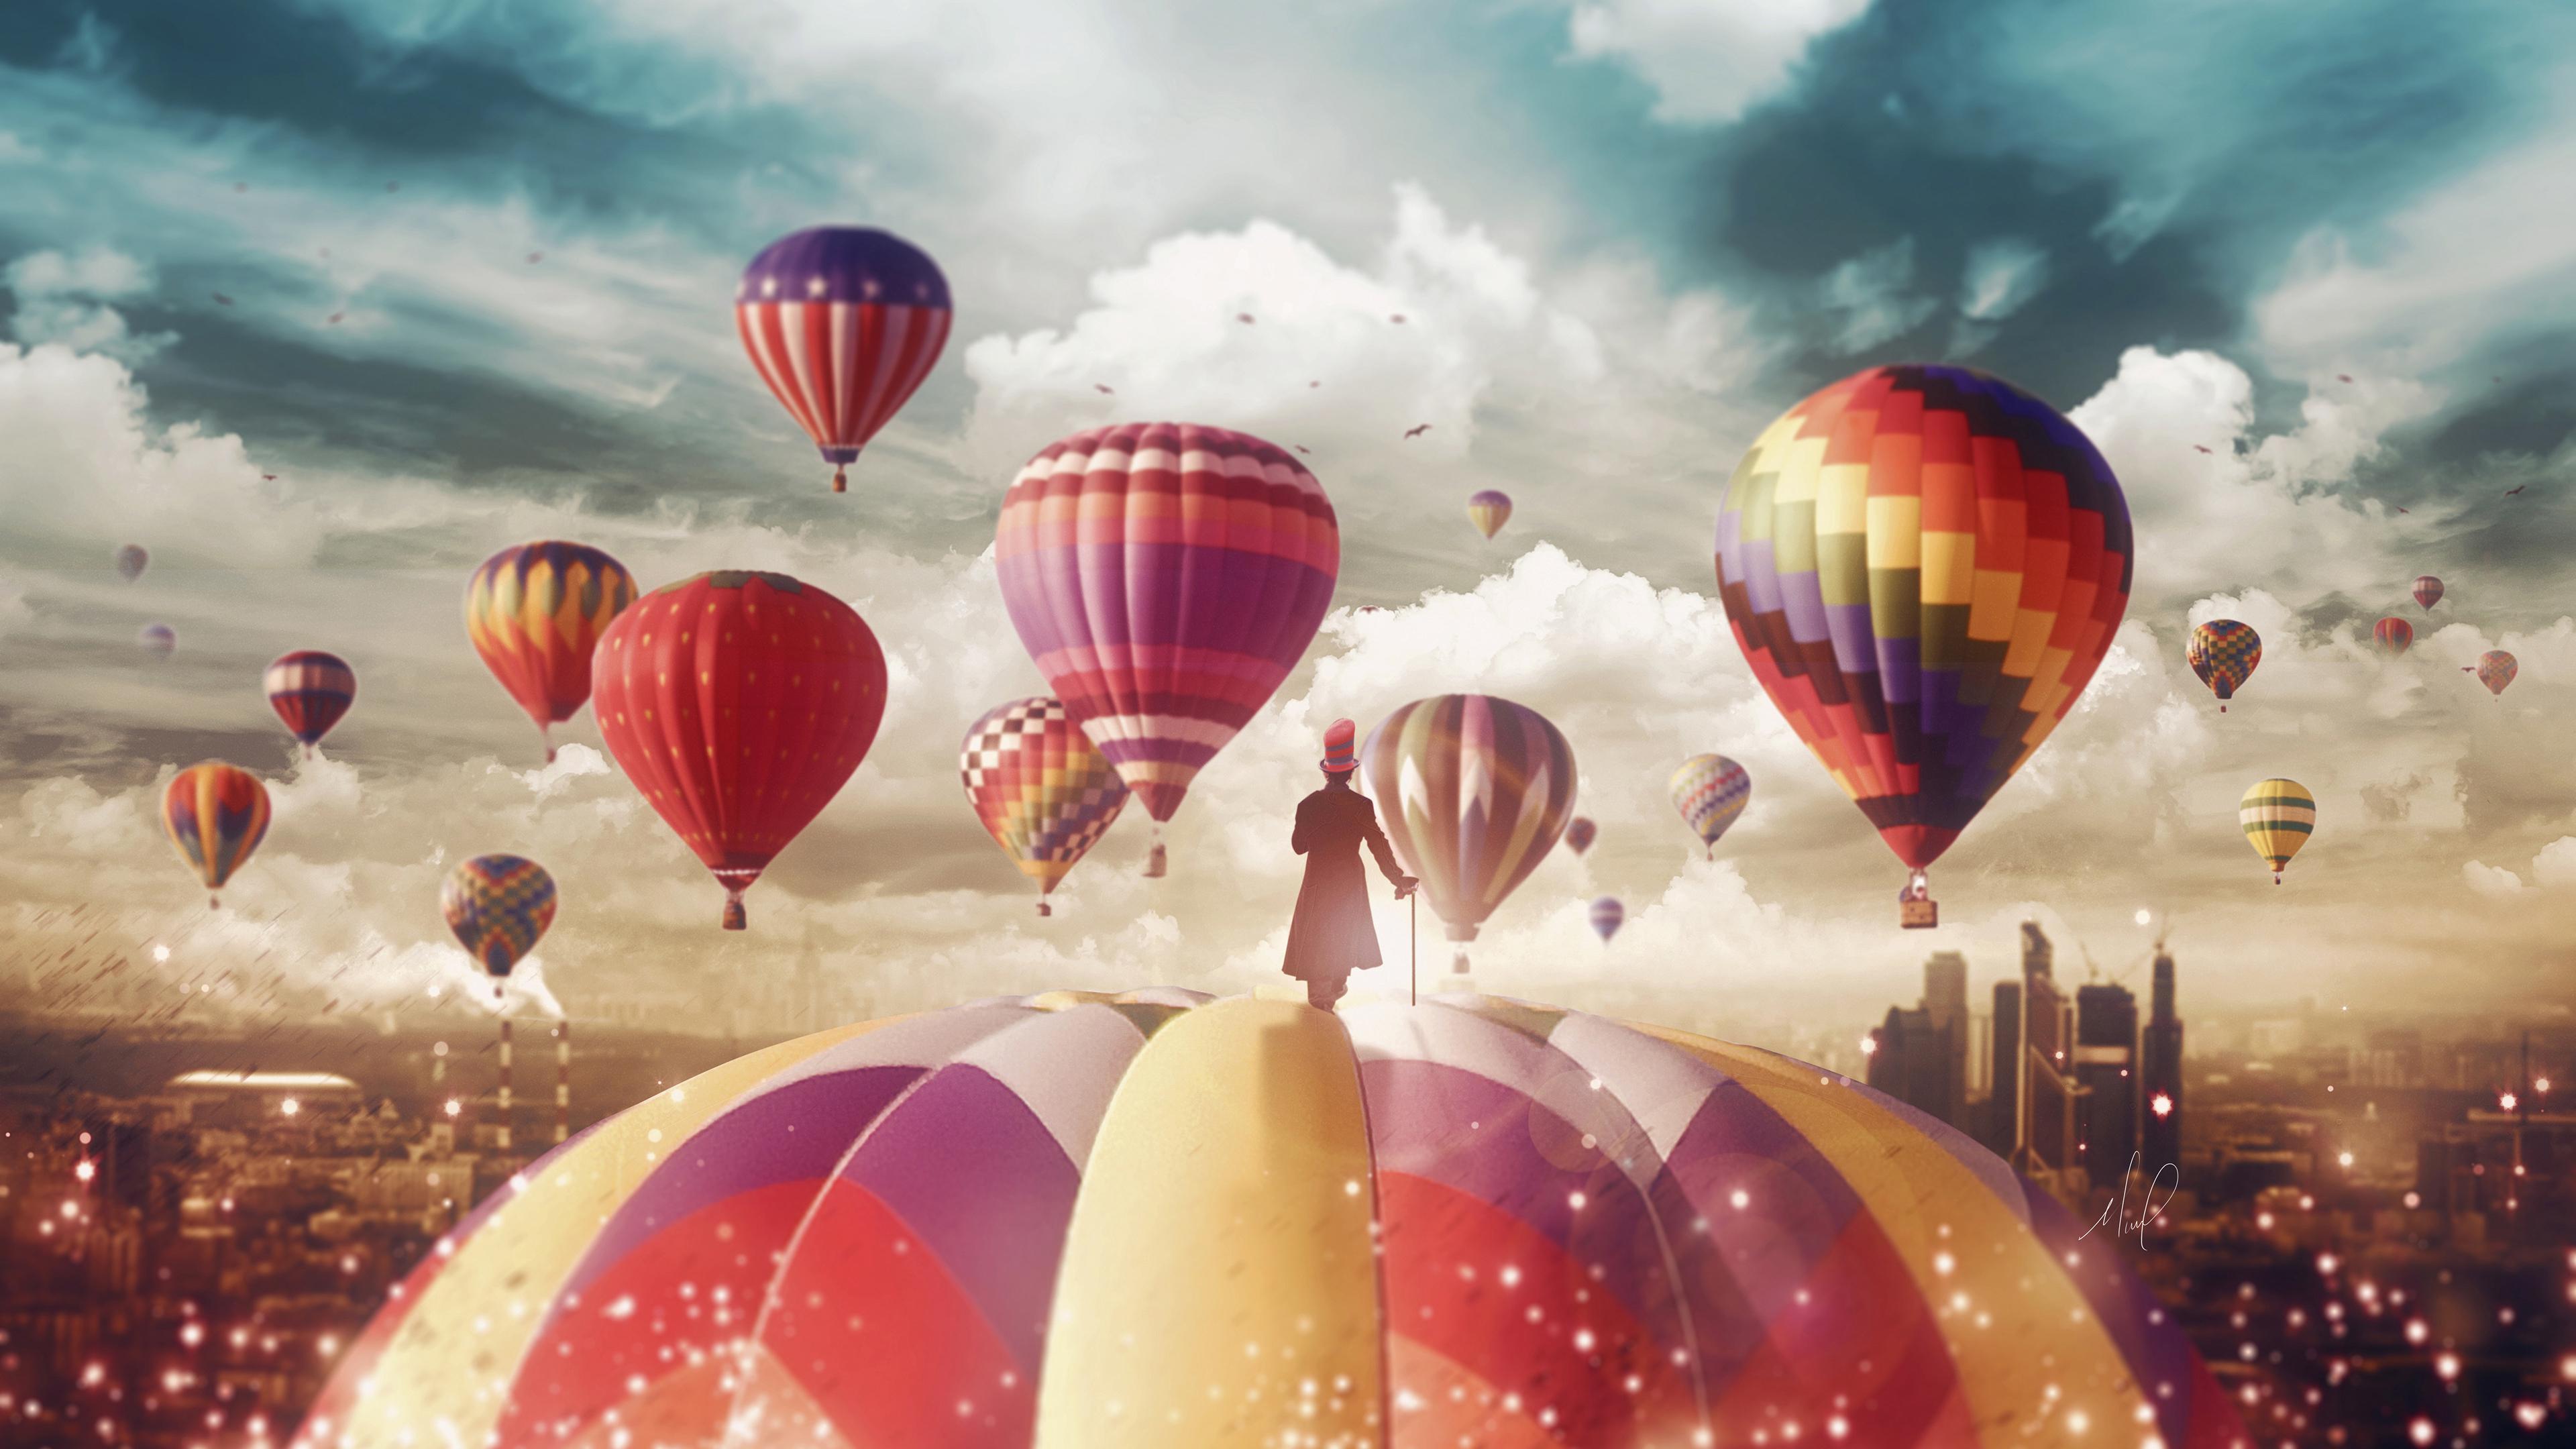 Balloons 4K wallpaper for your desktop or mobile screen free and easy to download